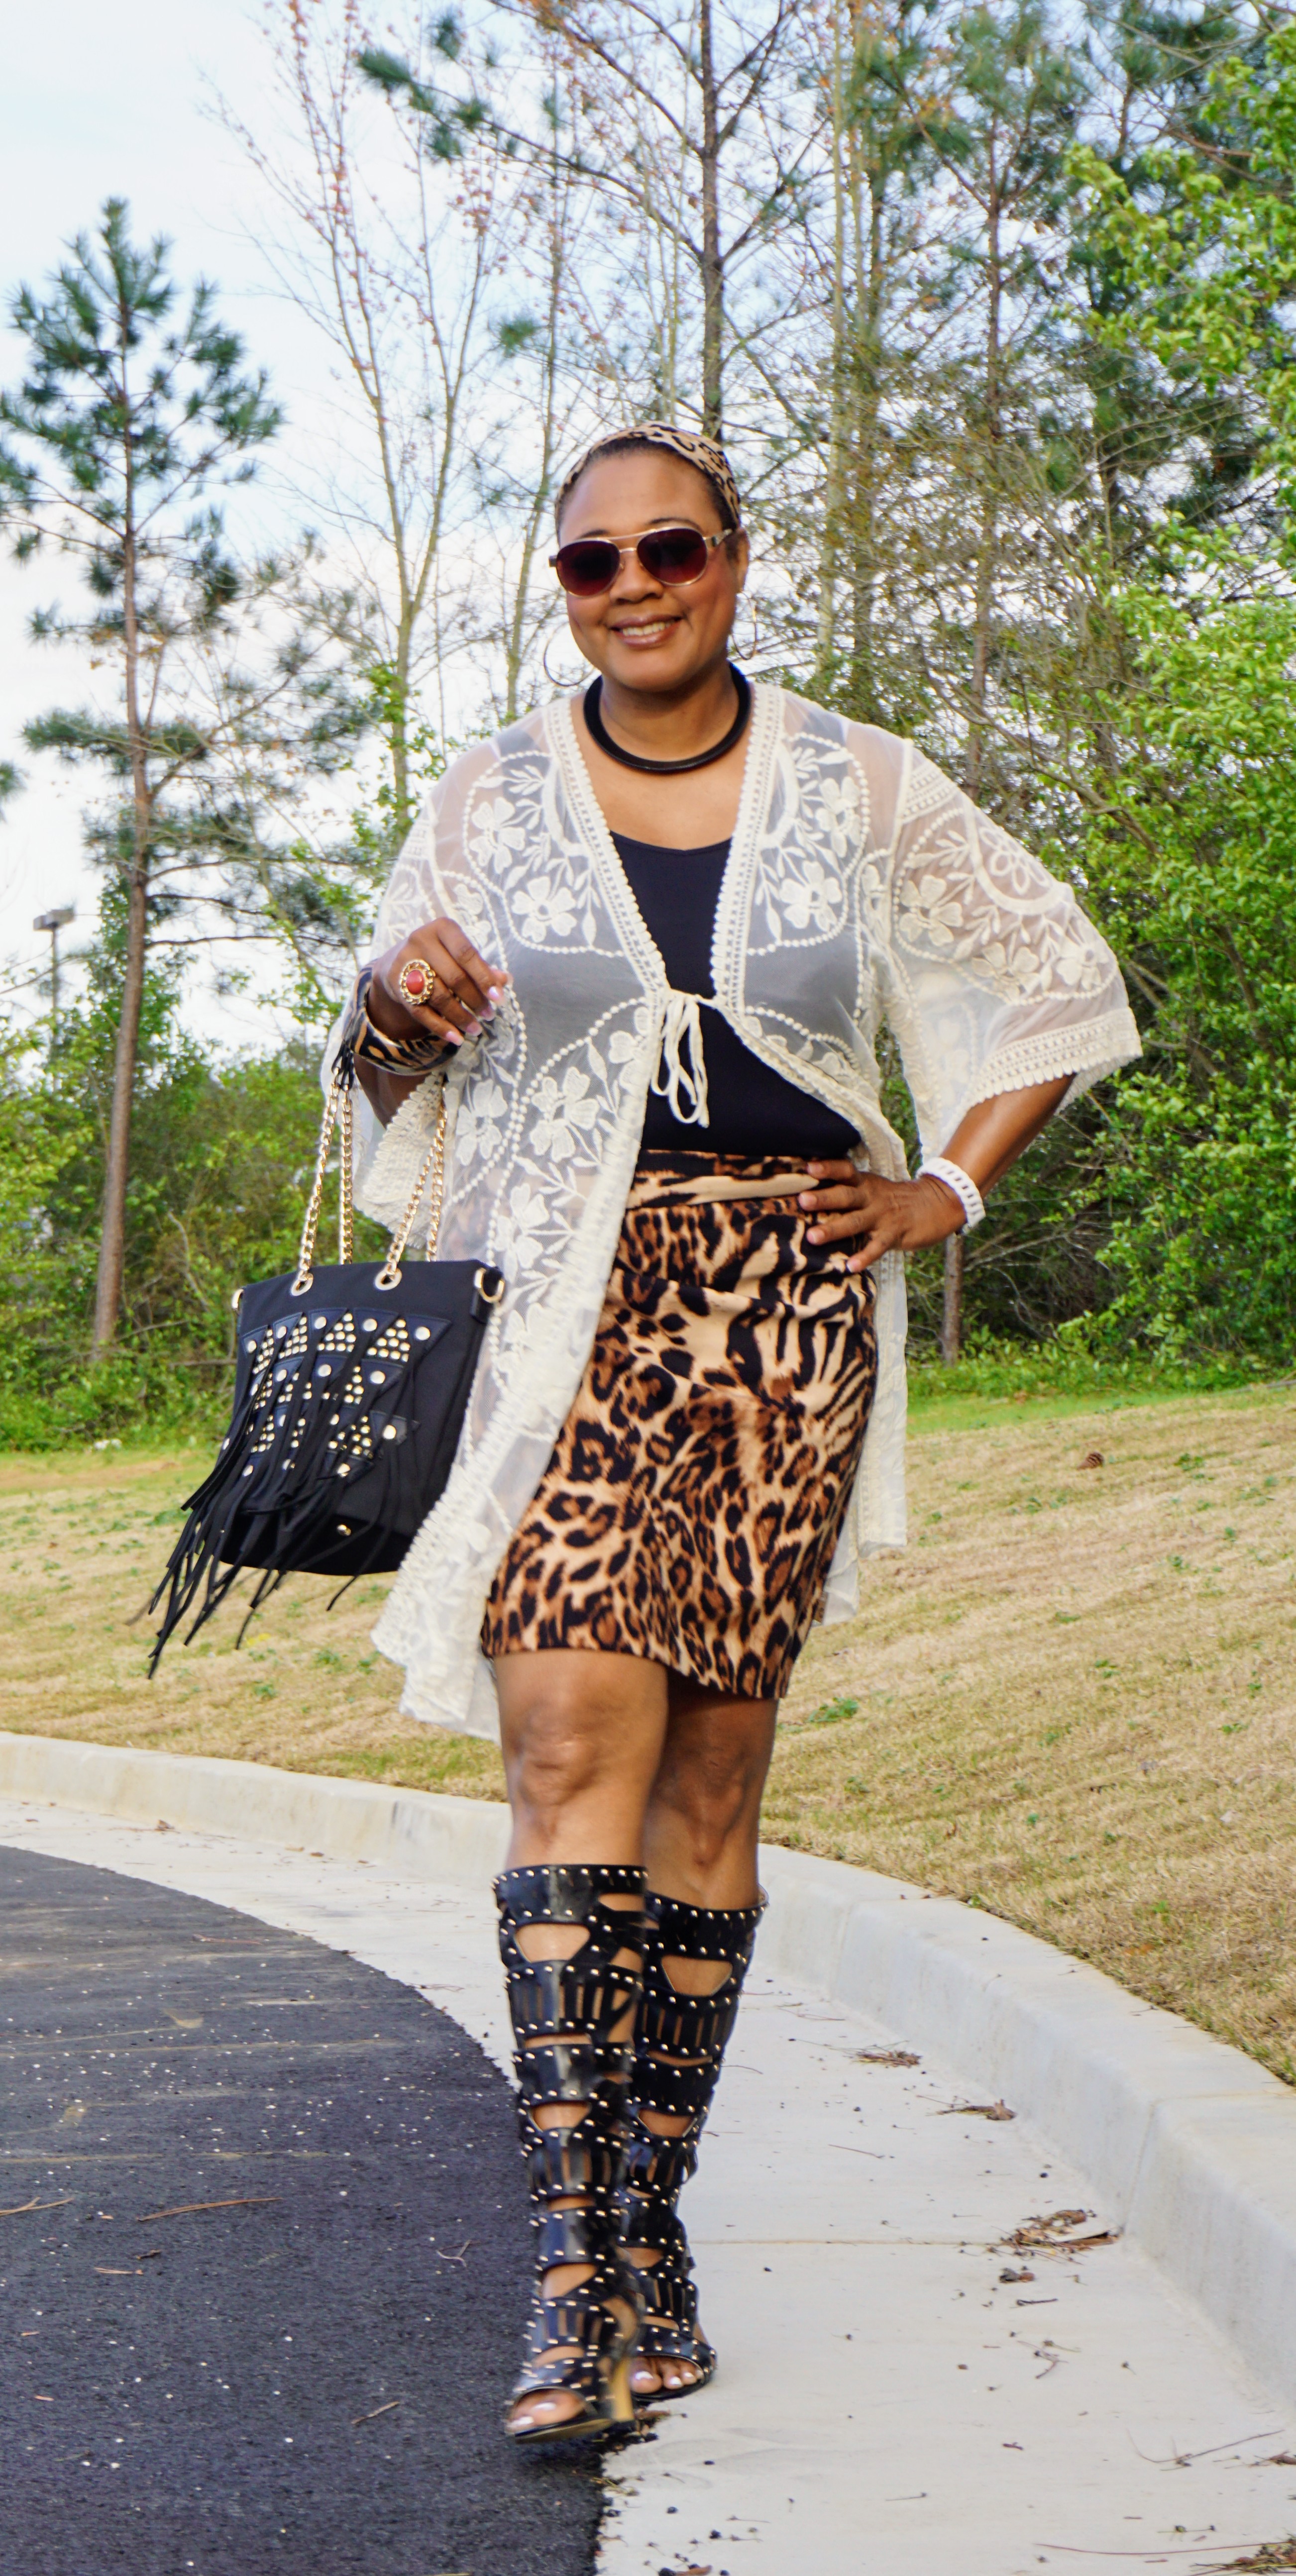 A Midnight Velvet customer in sunglasses, an animal print skirt, black cami, white lace cardigan, and black studded boots.